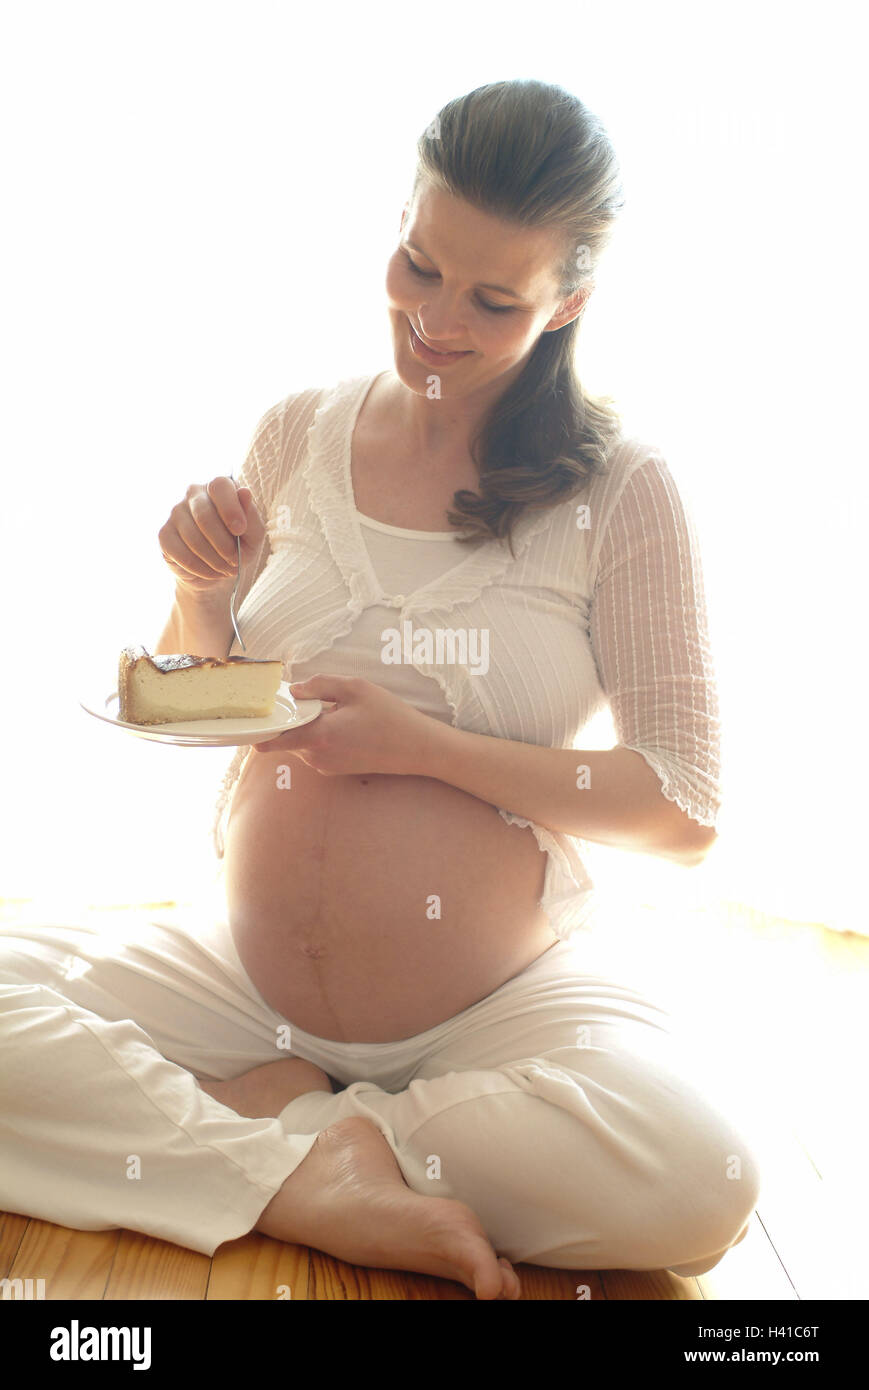 Woman, pregnant, cross legged, cakes, eat, Gestation, gestation, 25 - 35 years, pregnant, gestation, baby abdomen, cake pieces, cake, sweetly, sweet, hunger, sitomania, craving, eating craving, appetite, intermeal, hormones, naturalness, smile, balance, p Stock Photo